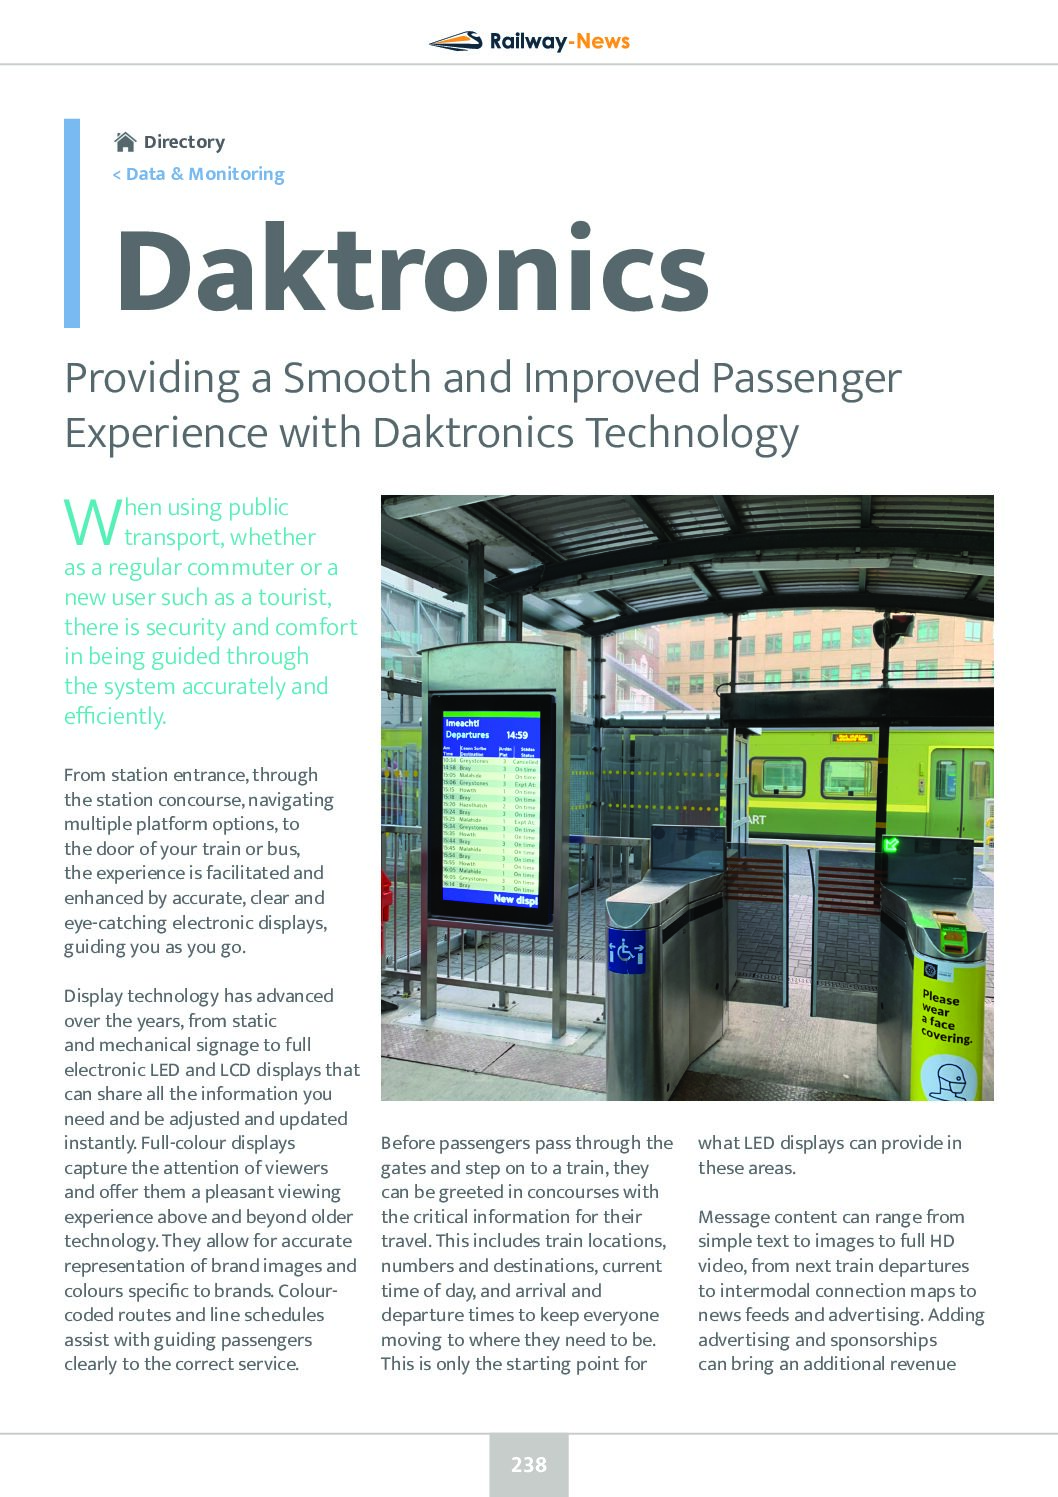 Providing a Smooth and Improved Passenger Experience with Daktronics Display Technology